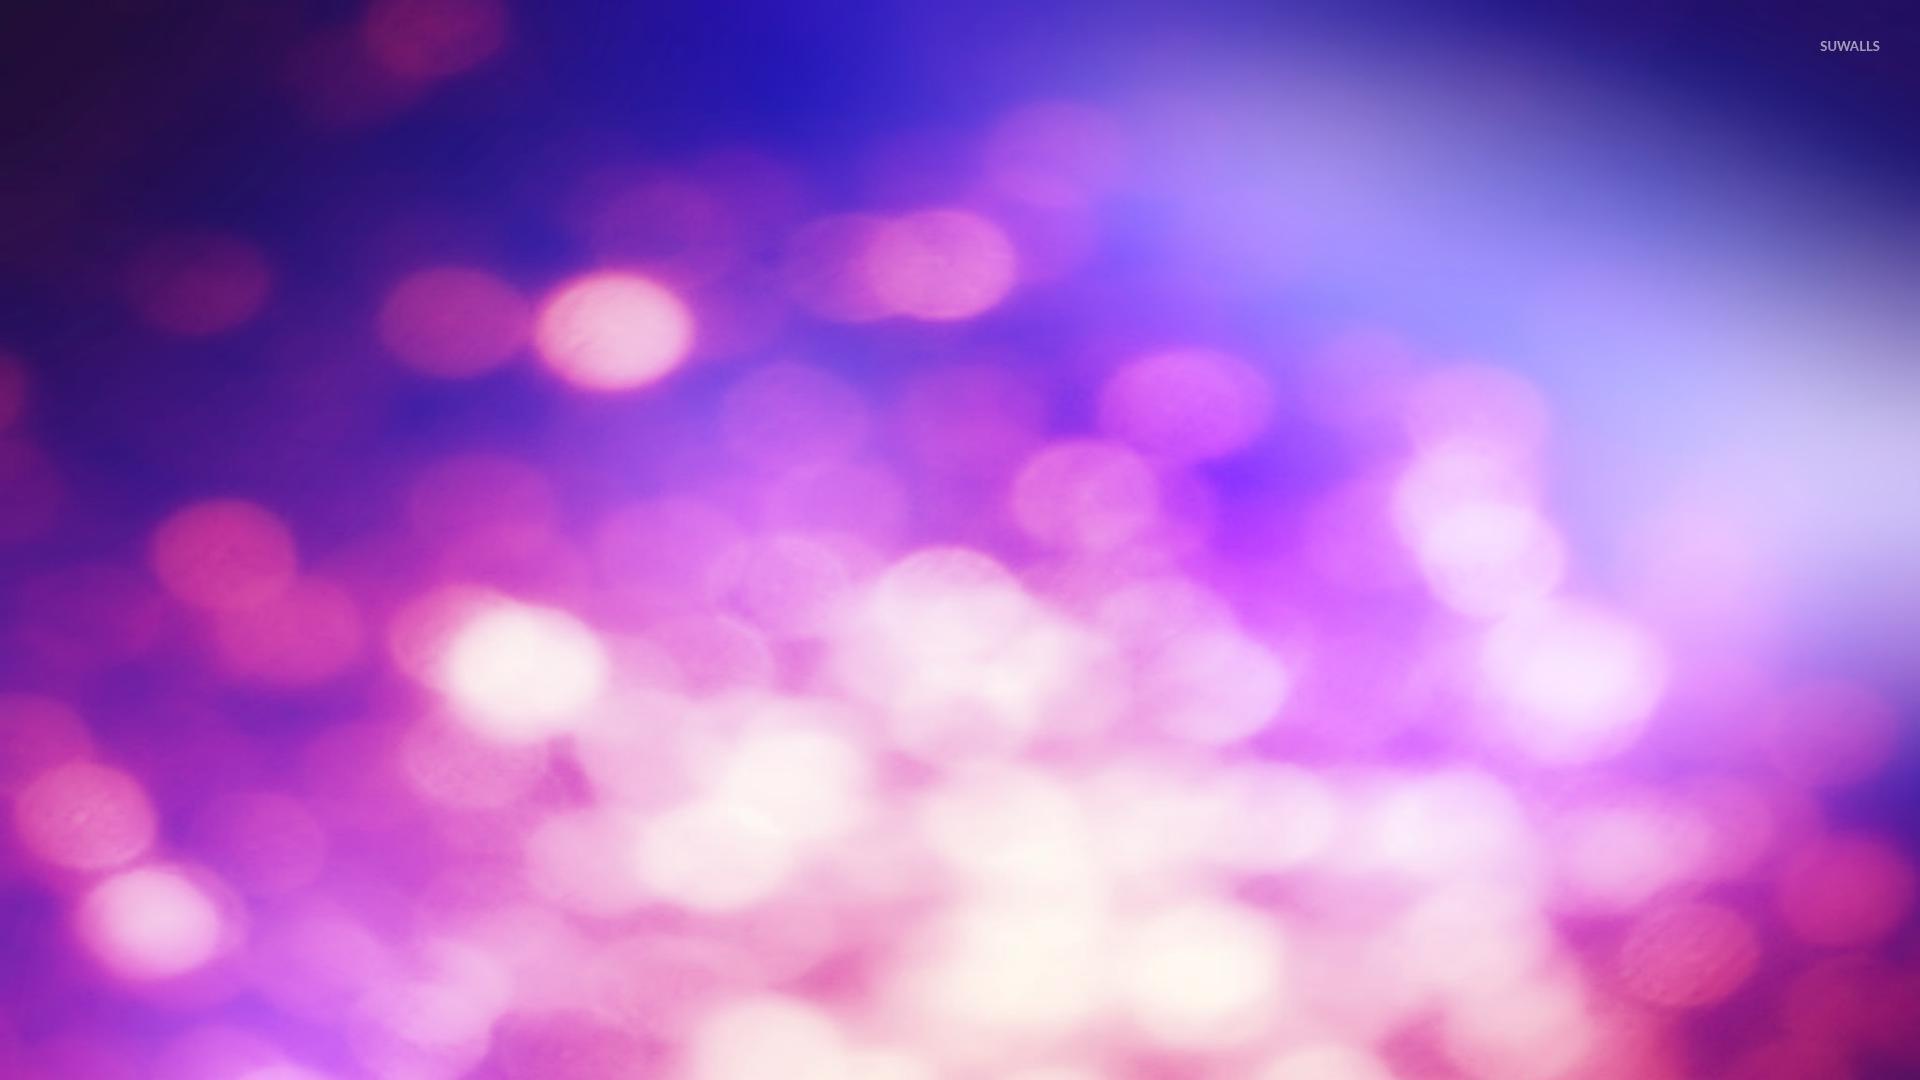 Violet blur [2] wallpaper - Abstract wallpapers - #27022